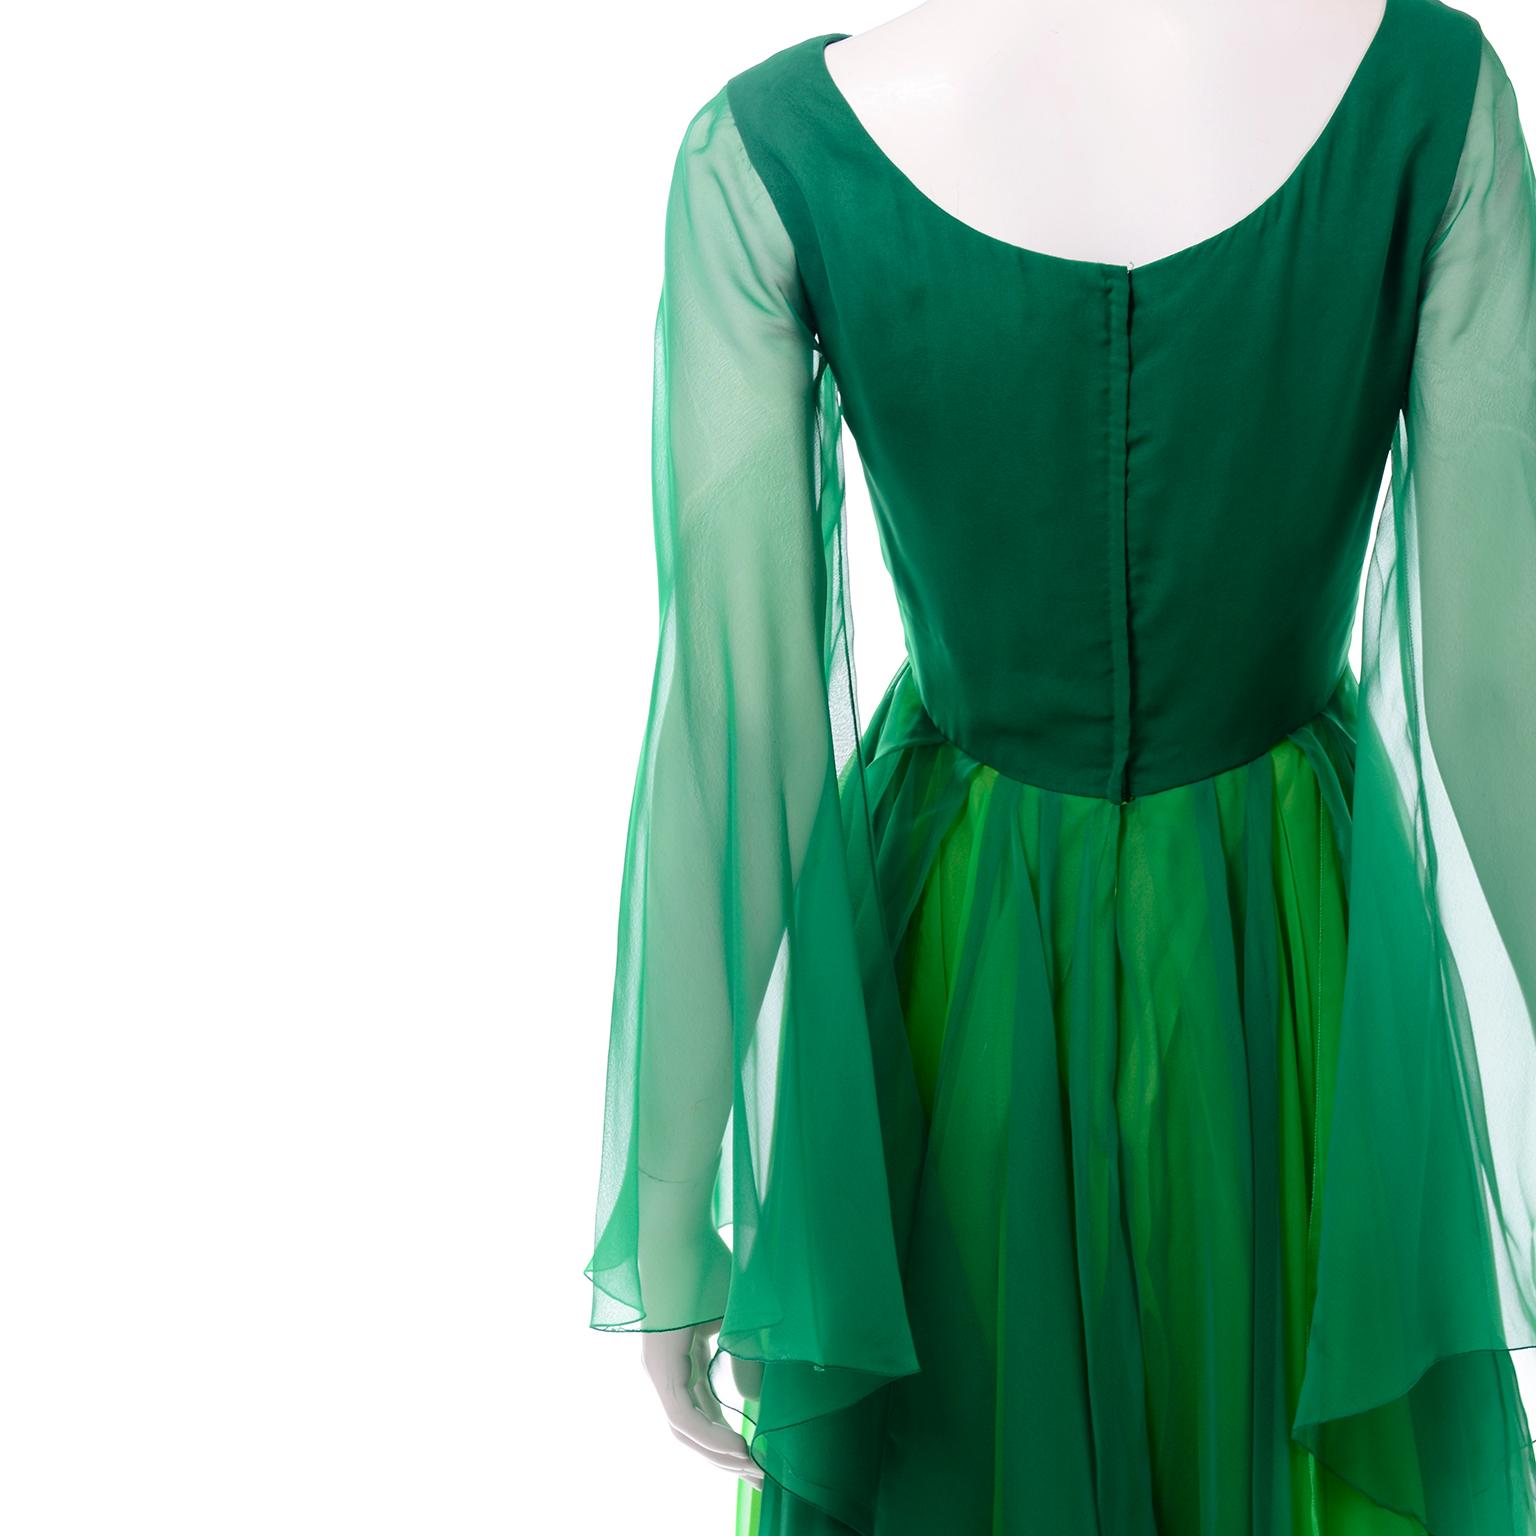 Vintage Layered Flowing Evening Dress in Multi Shades of Green Silk Chiffon  For Sale 1